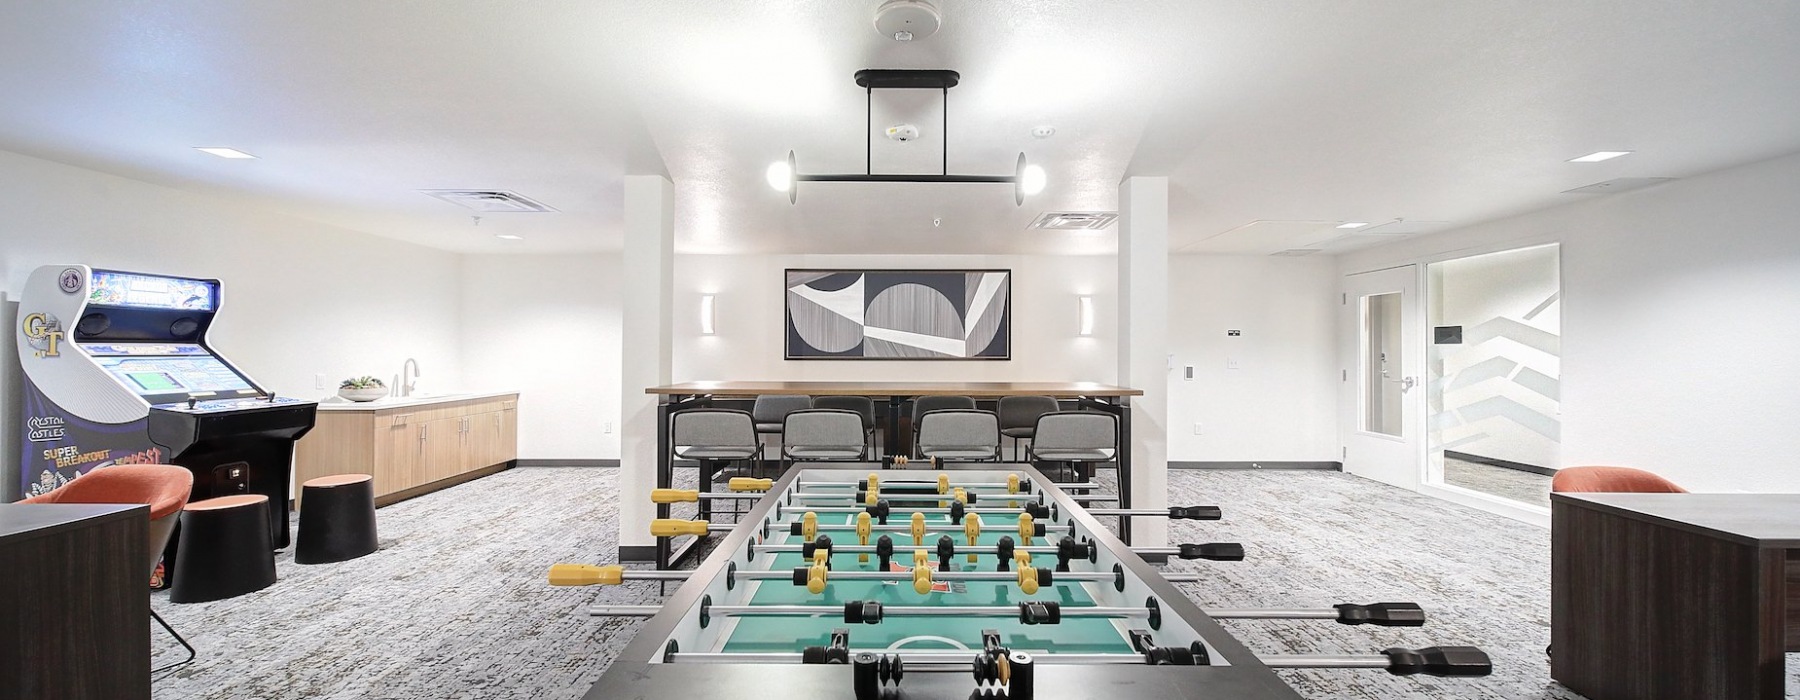 Game room with foosball, arcade game, and shuffleboard